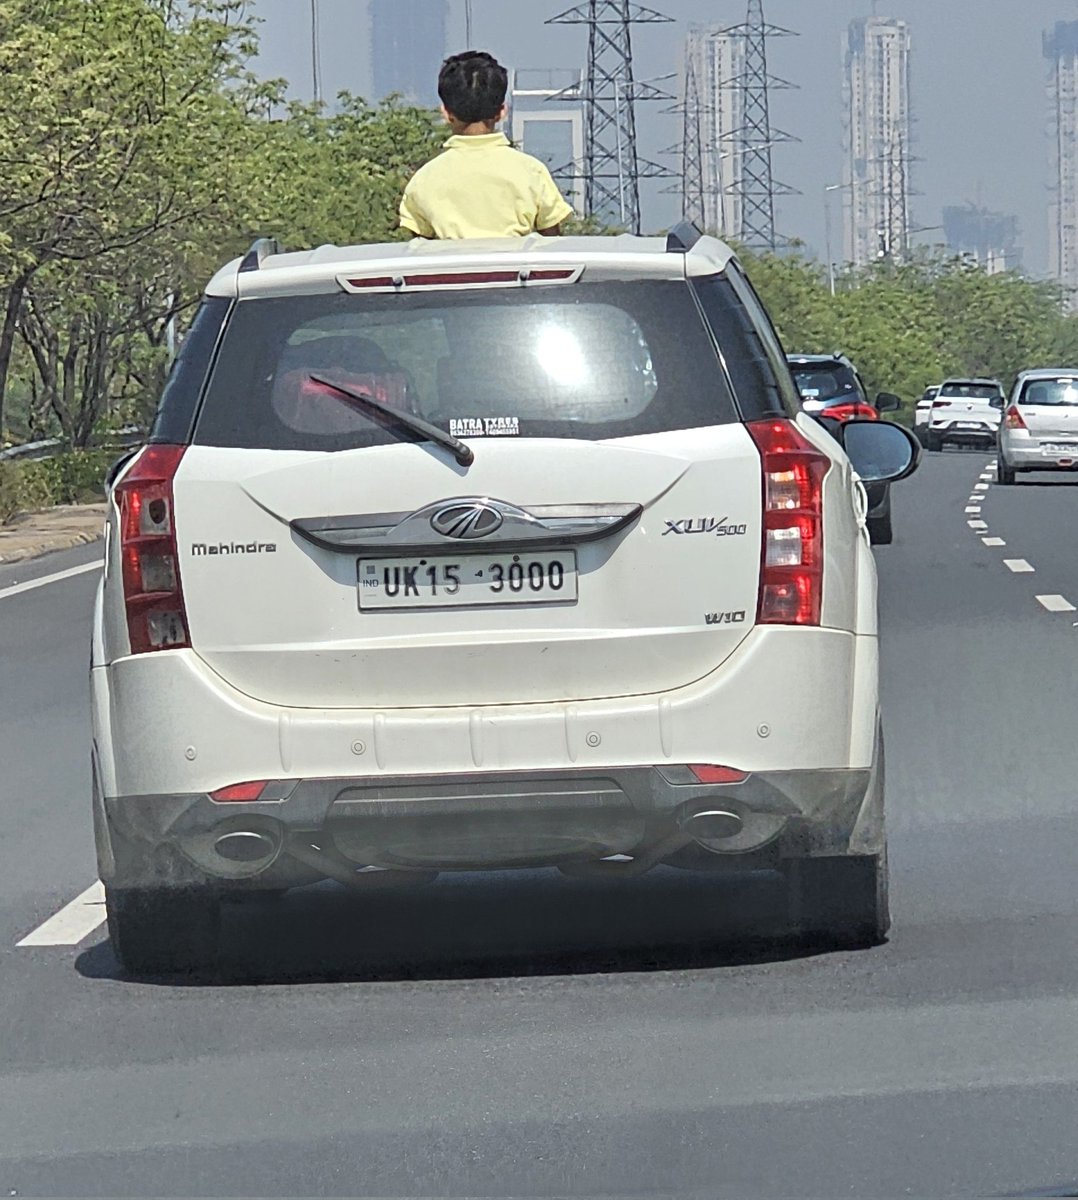 Parents themselves risking the life of a boy on Noida Express way. 10.22 AM, 24.4.24. 
What lessons of road safety the boy is expected to learn?
@noidapolice 
@noidatraffic 
May like to take action.
@ukcmo @uttarakhandcops Please note. This vehicle is registered in Uttarakhand.